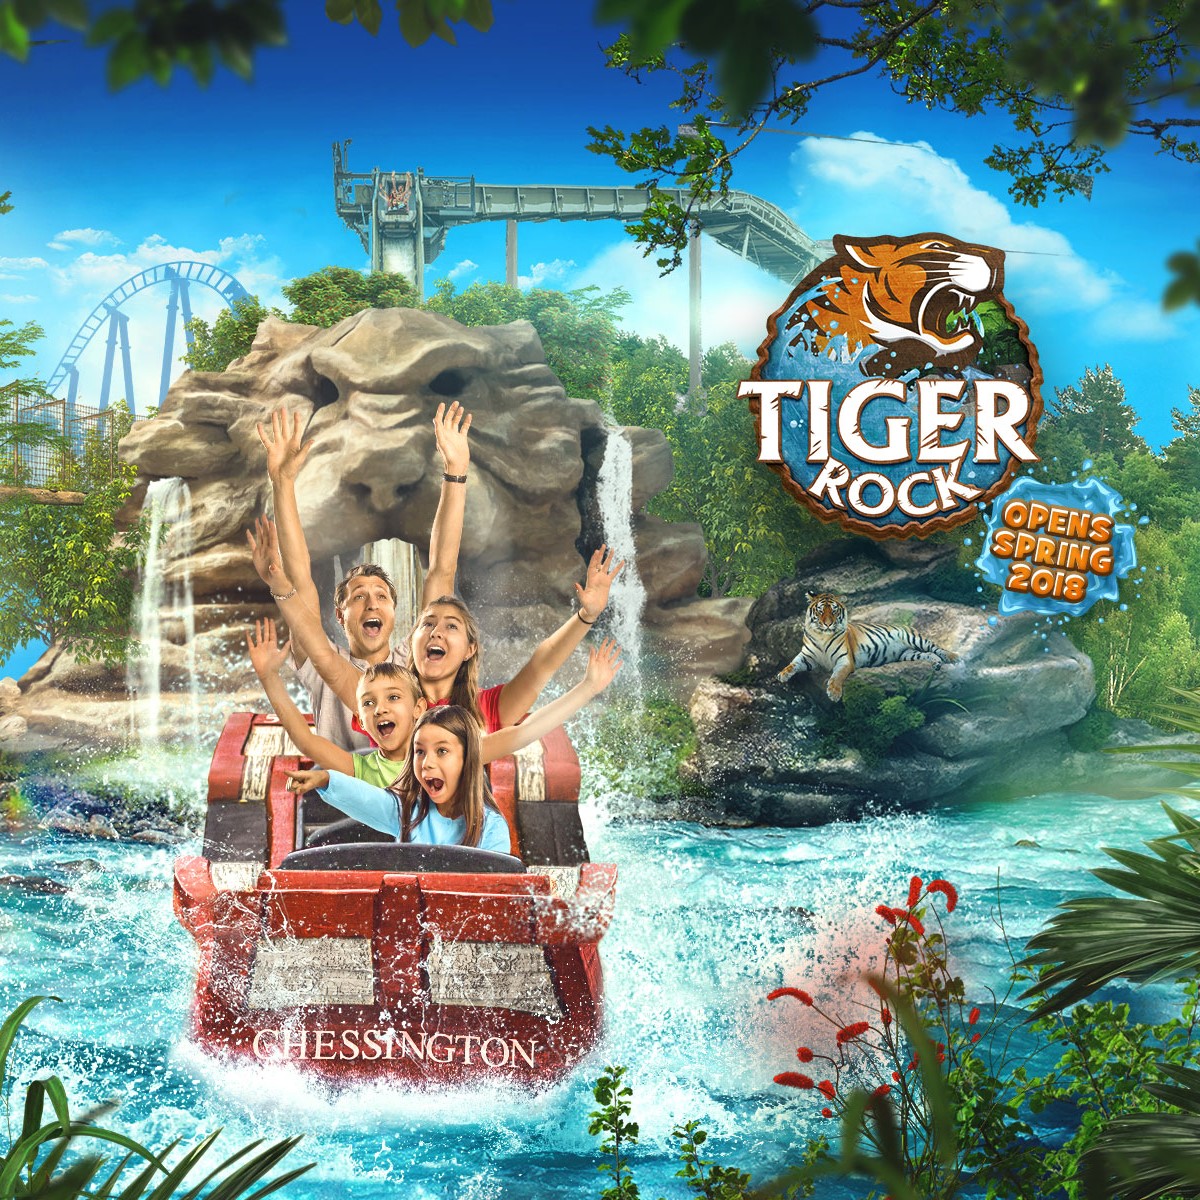 New for 2018: Tiger Rock in Land of the Tiger